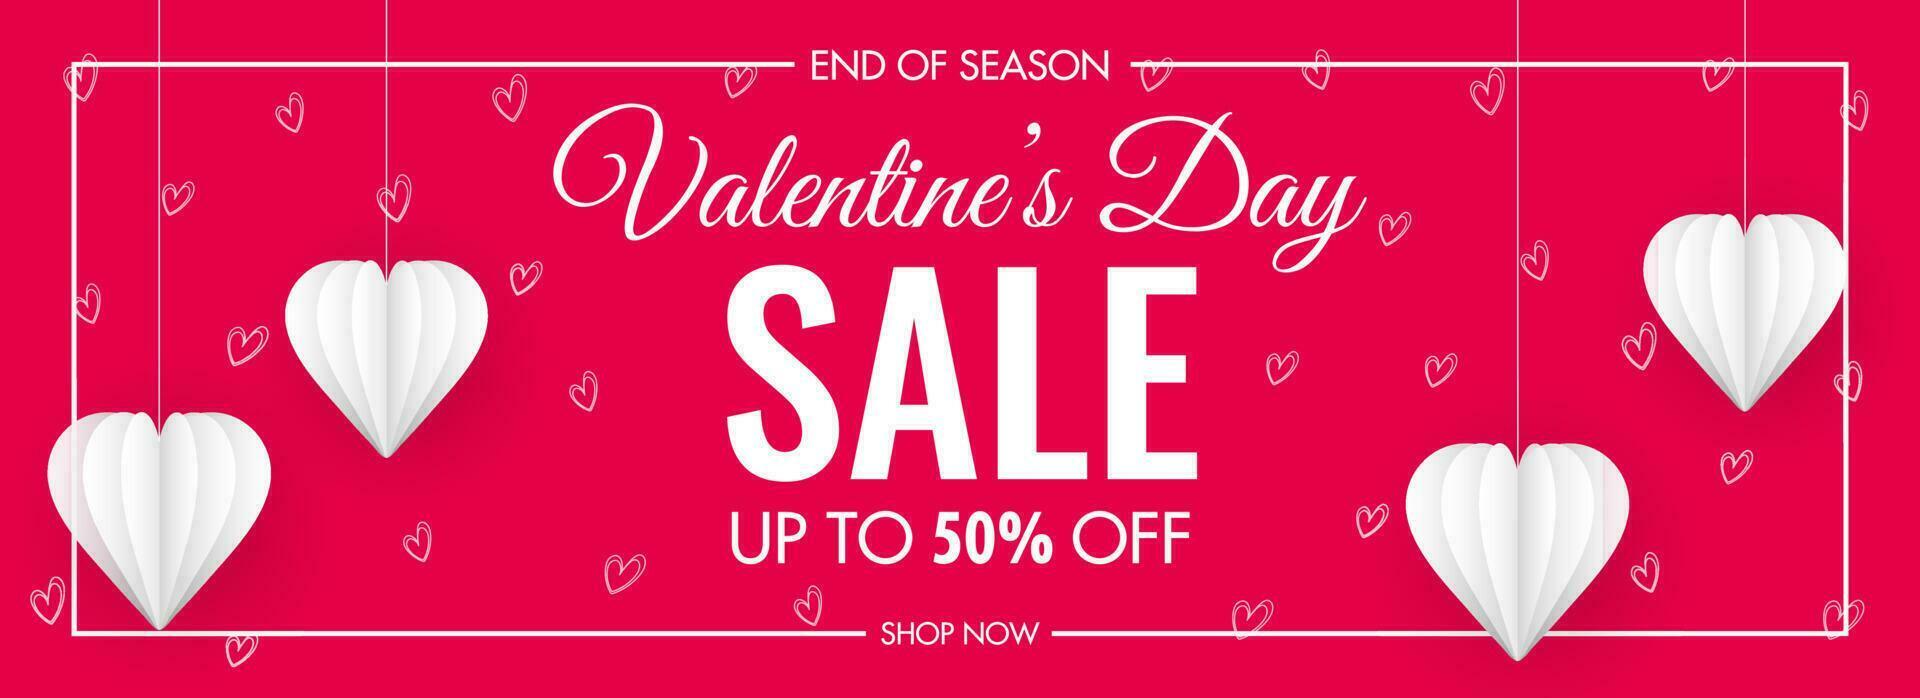 Valentine's Day Sale Header or Banner Design with Discount Offer and White Paper Cut Hearts Decorated on Pink Background. vector